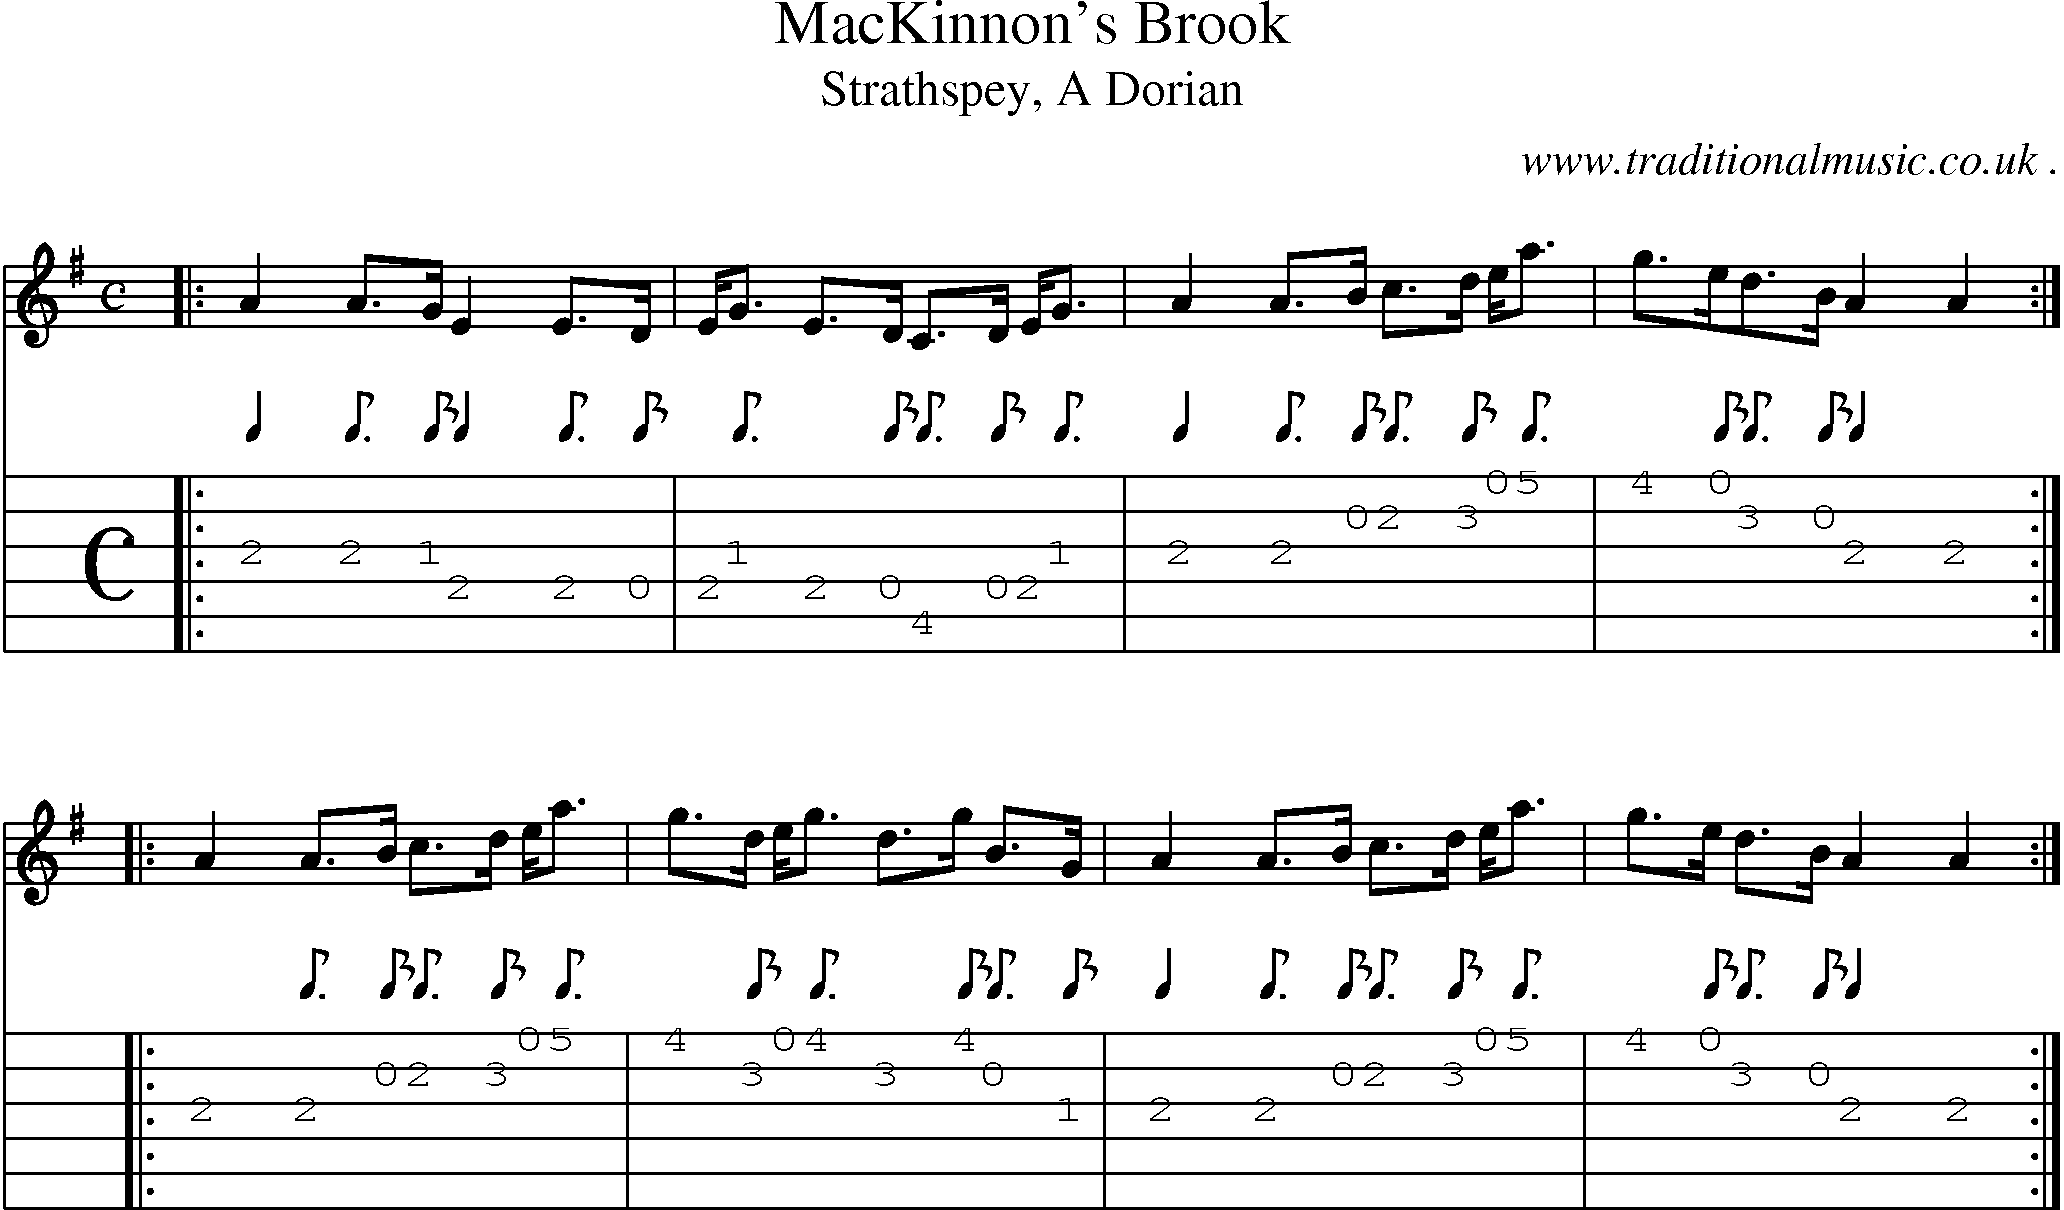 Sheet-music  score, Chords and Guitar Tabs for Mackinnons Brook